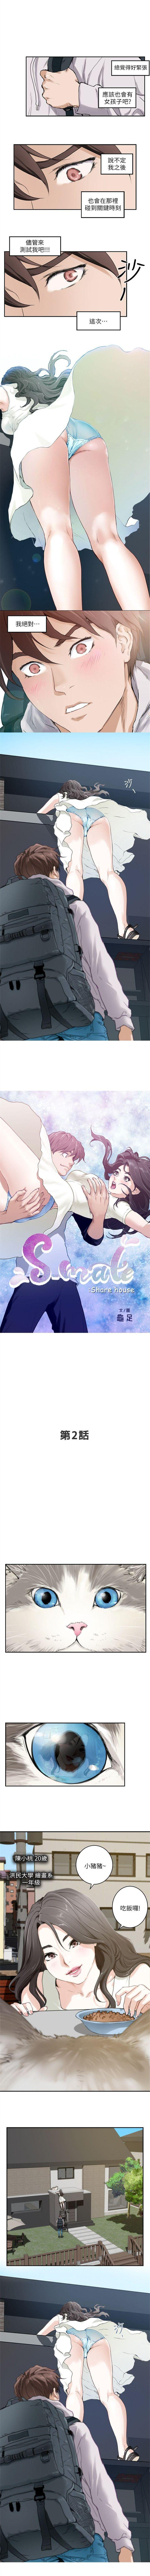 Blow [週五] [龜足] S-Mate 1-86 官方中文（連載中） Foursome - Page 8